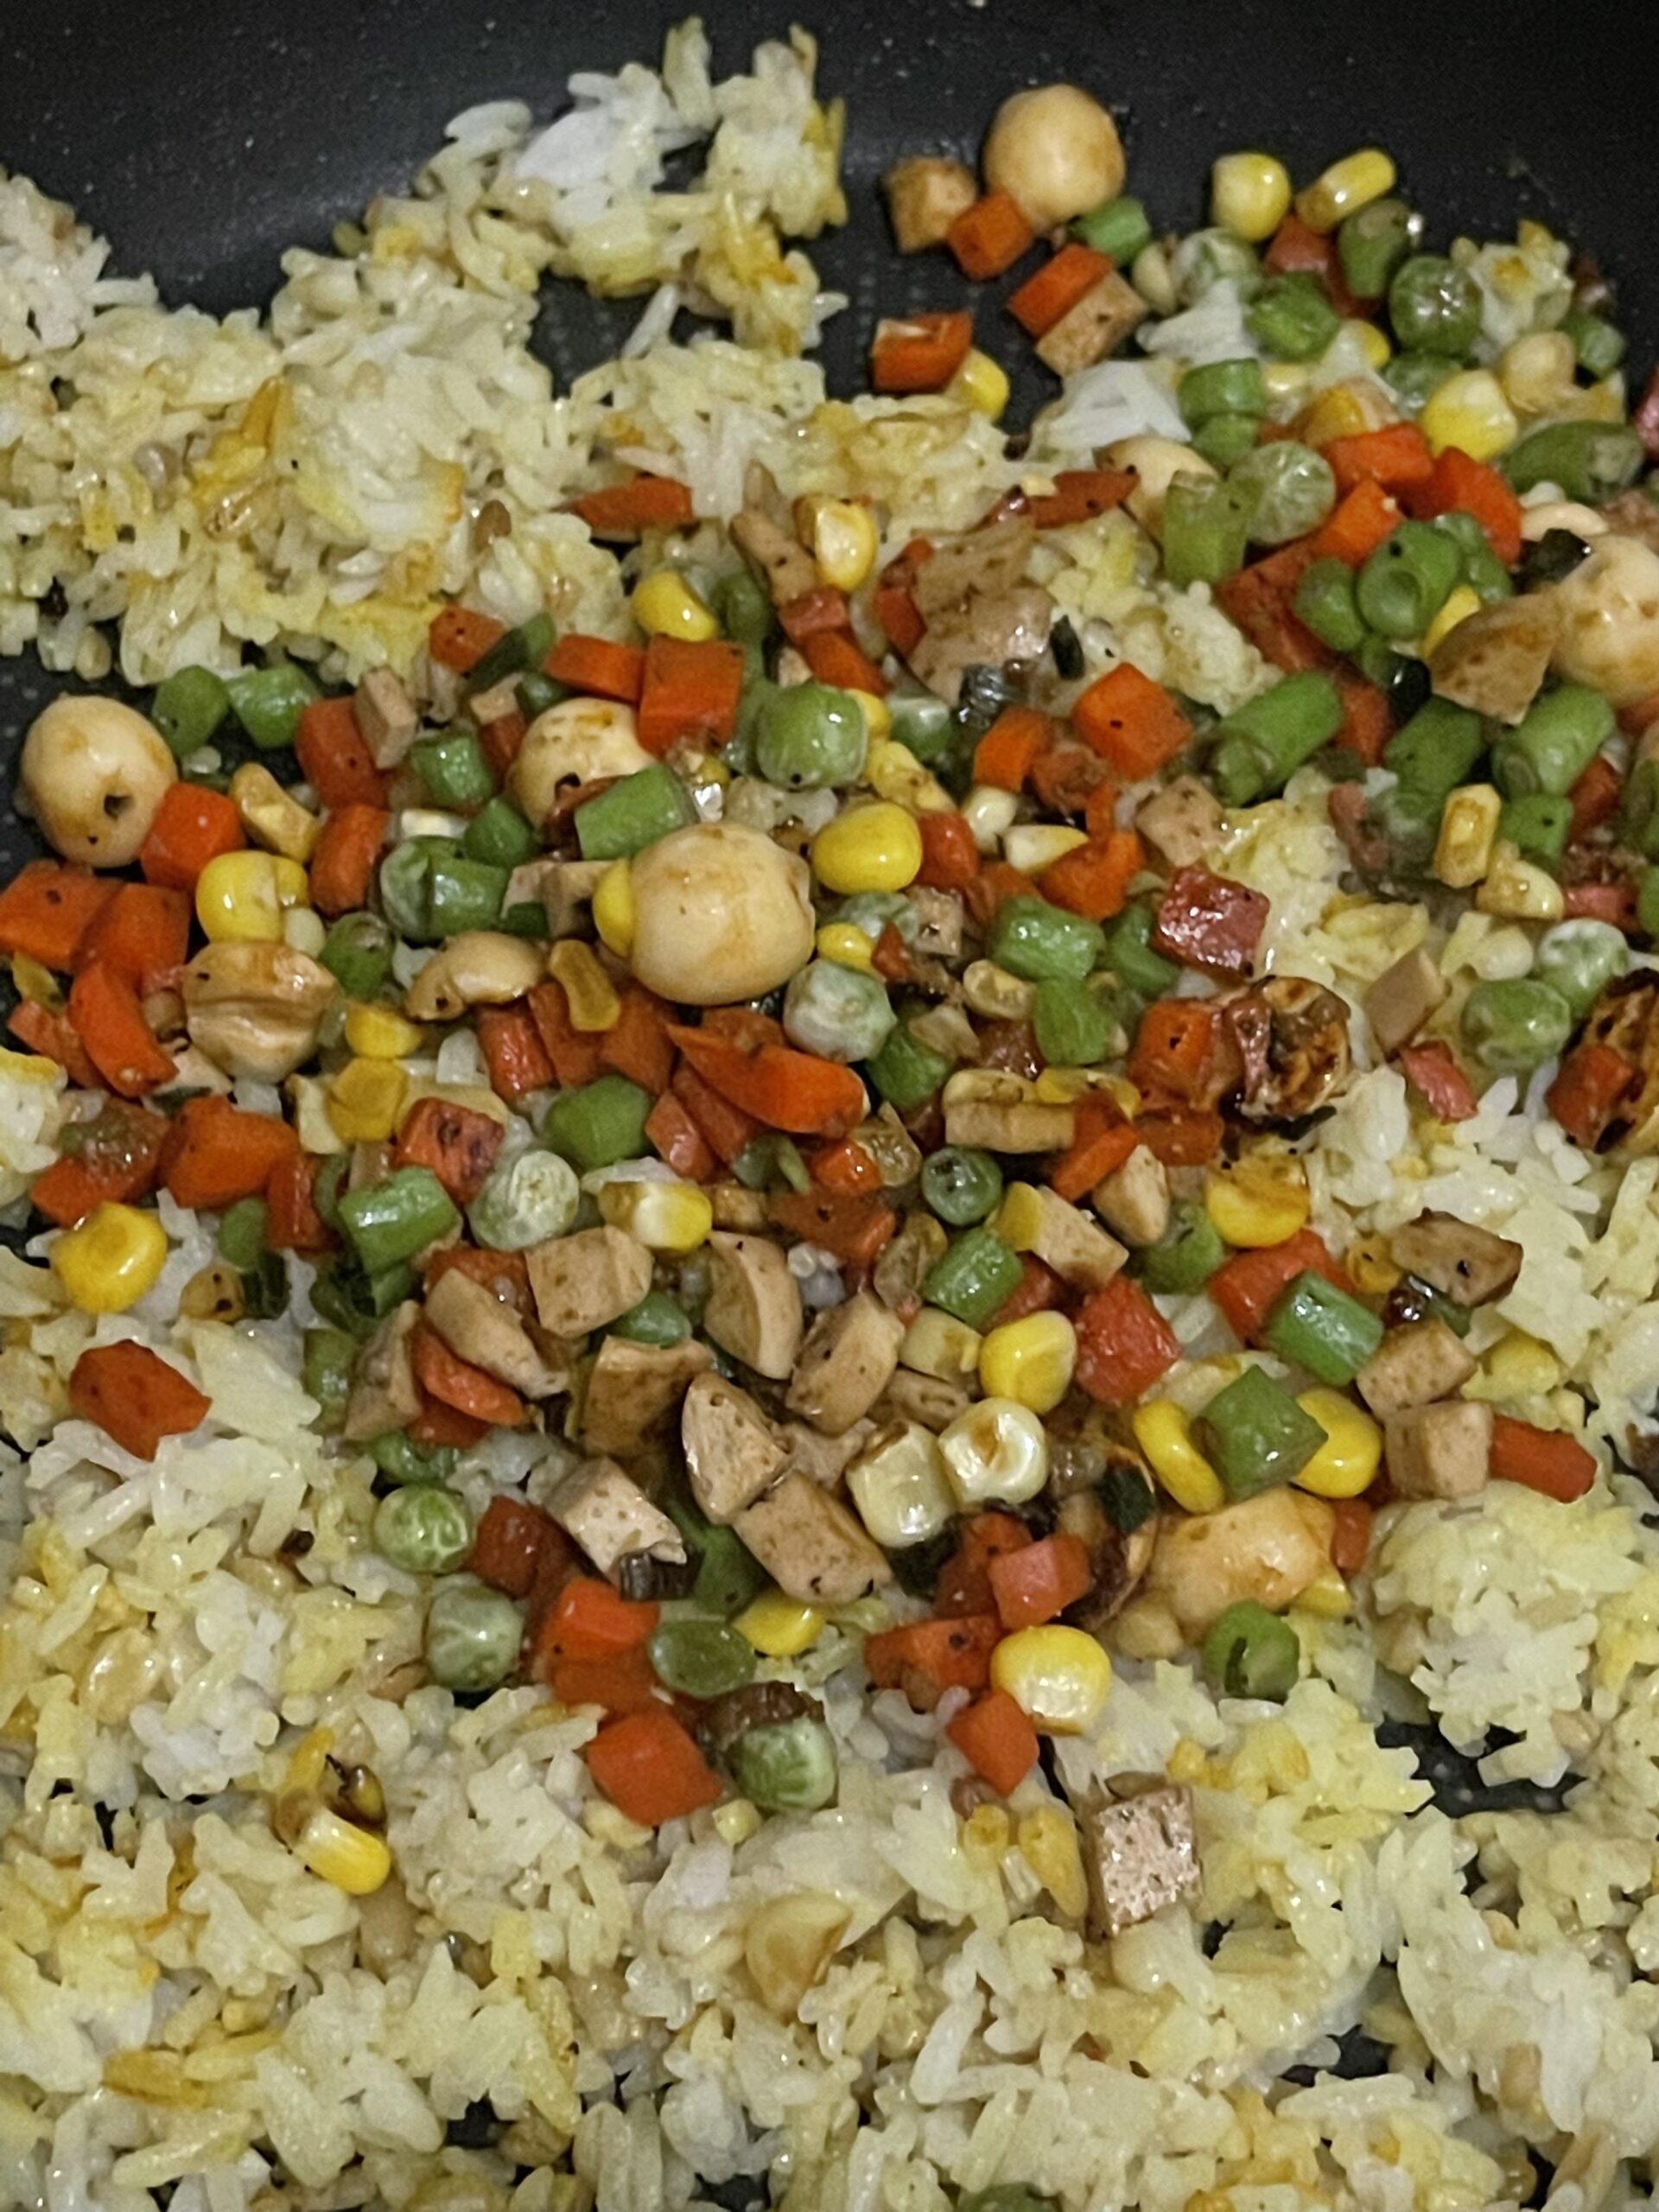 rice with stir fried vegetables added back into the pan.